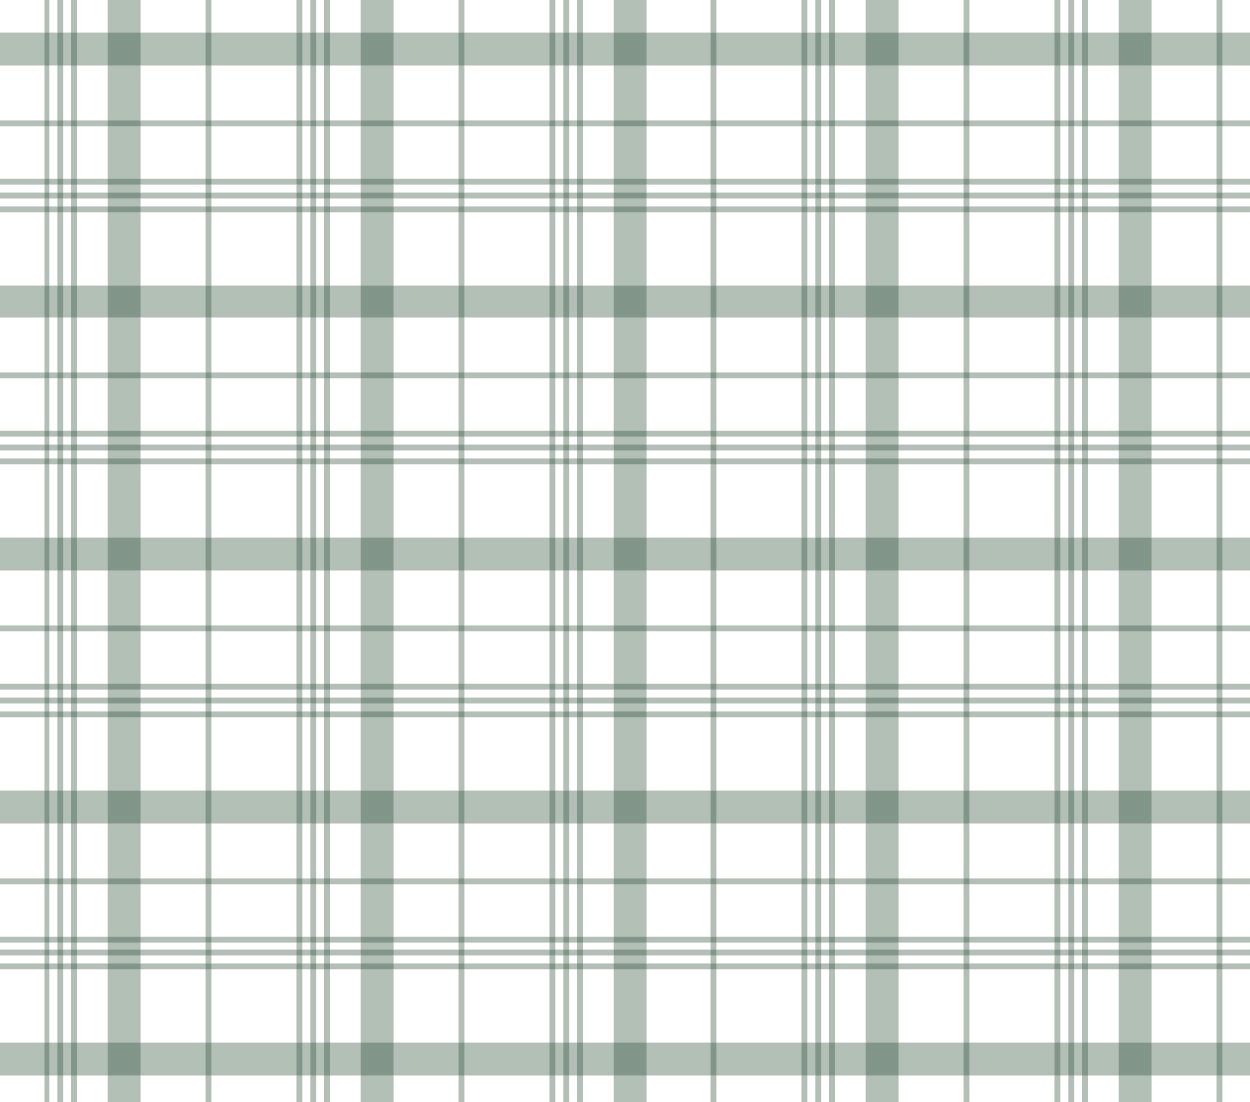 Wallpaper Plaid Green/ Sage Green Asymmetric Plaid Wallpaper / Removable / Peel and Stick / Unpasted / Pre-Pasted Wallpaper WW2103